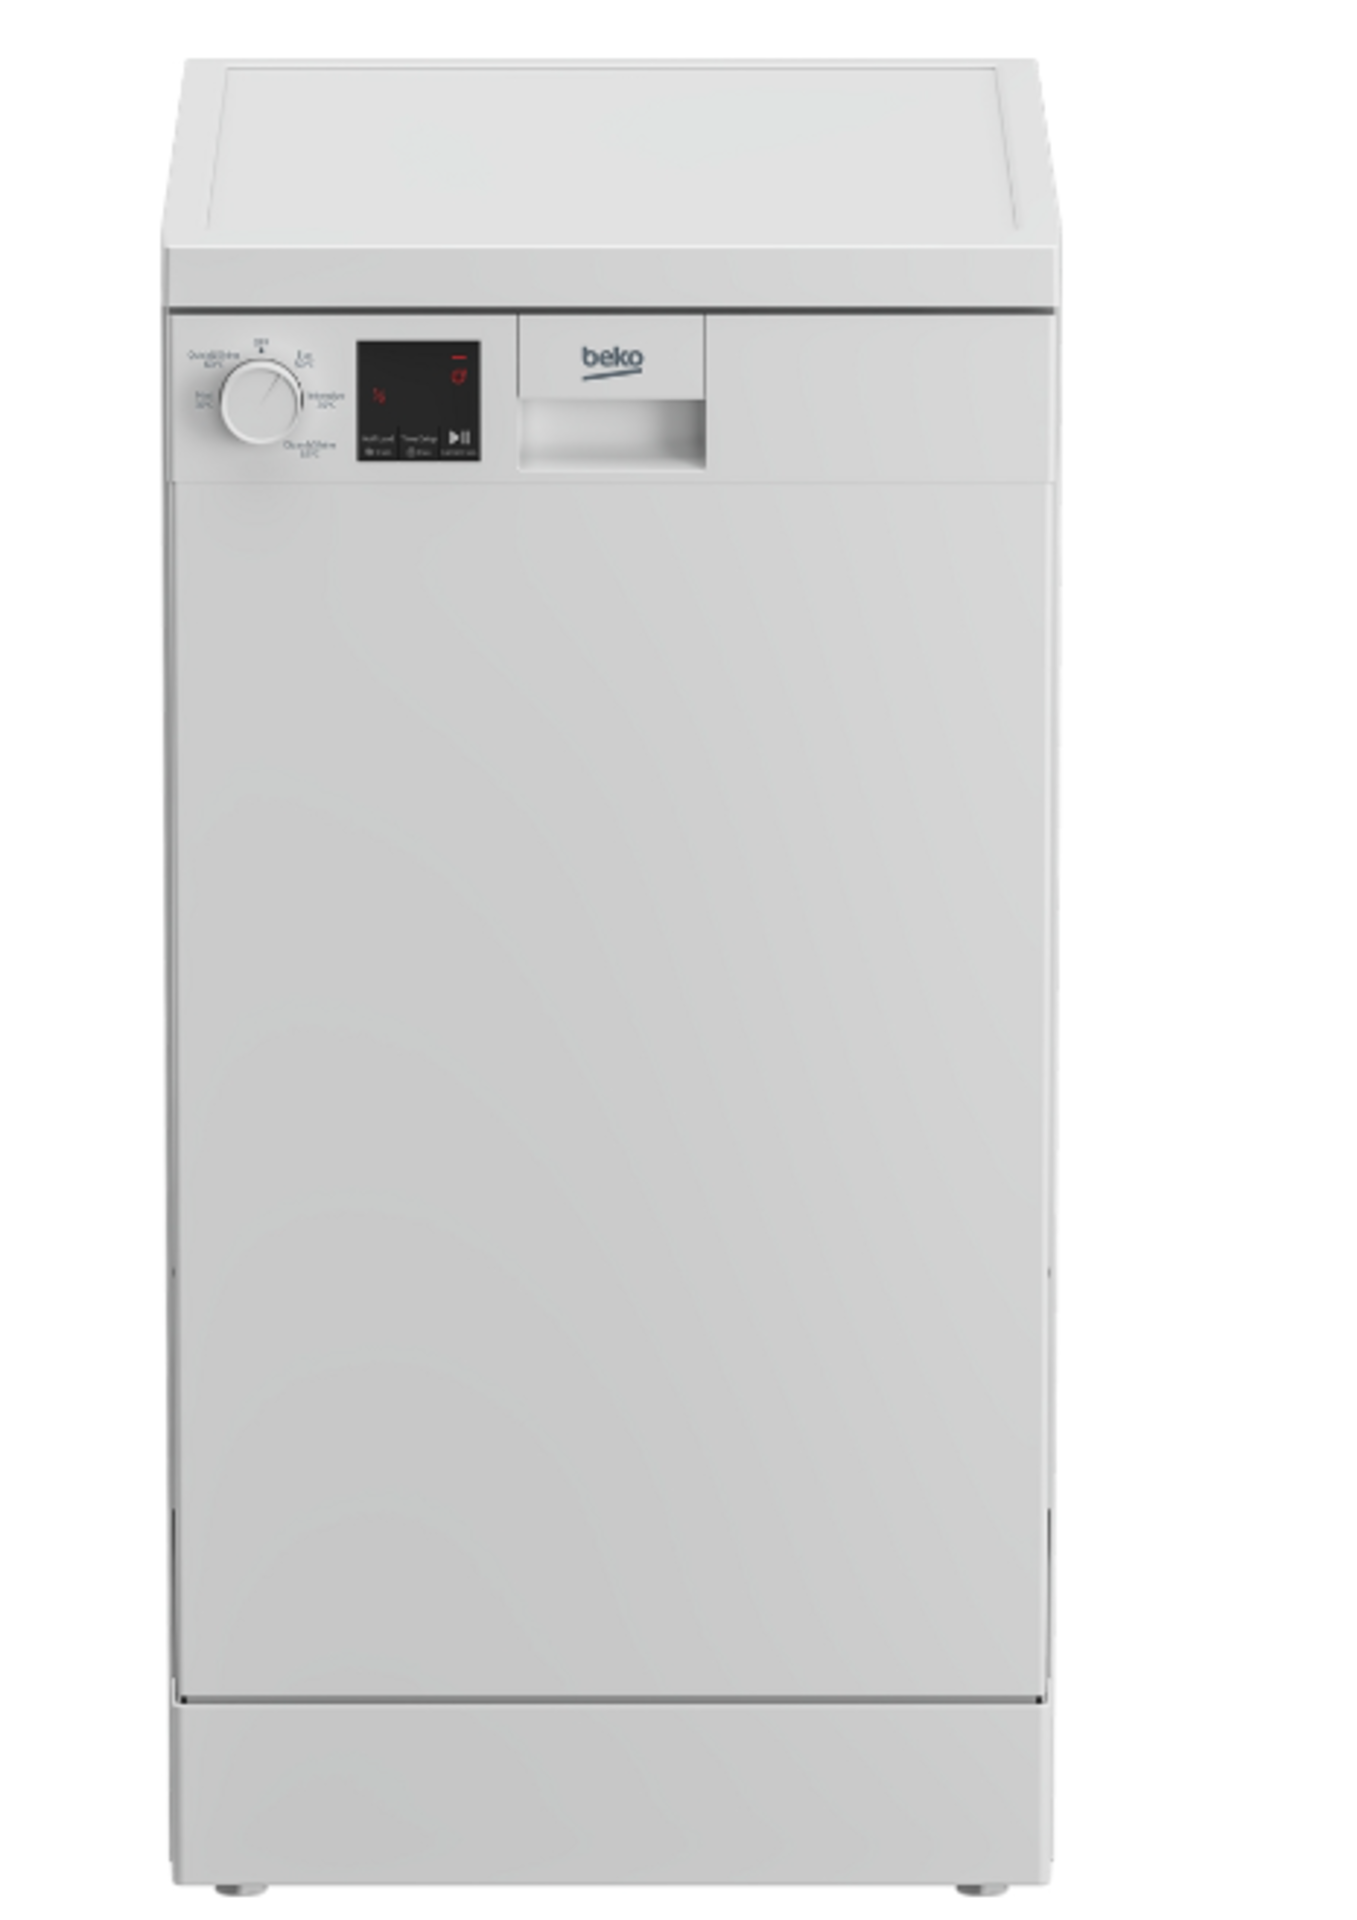 Beko DVS05Q20W Freestanding Dishwasher. -ER44. Saving you time and money every day, this slimline